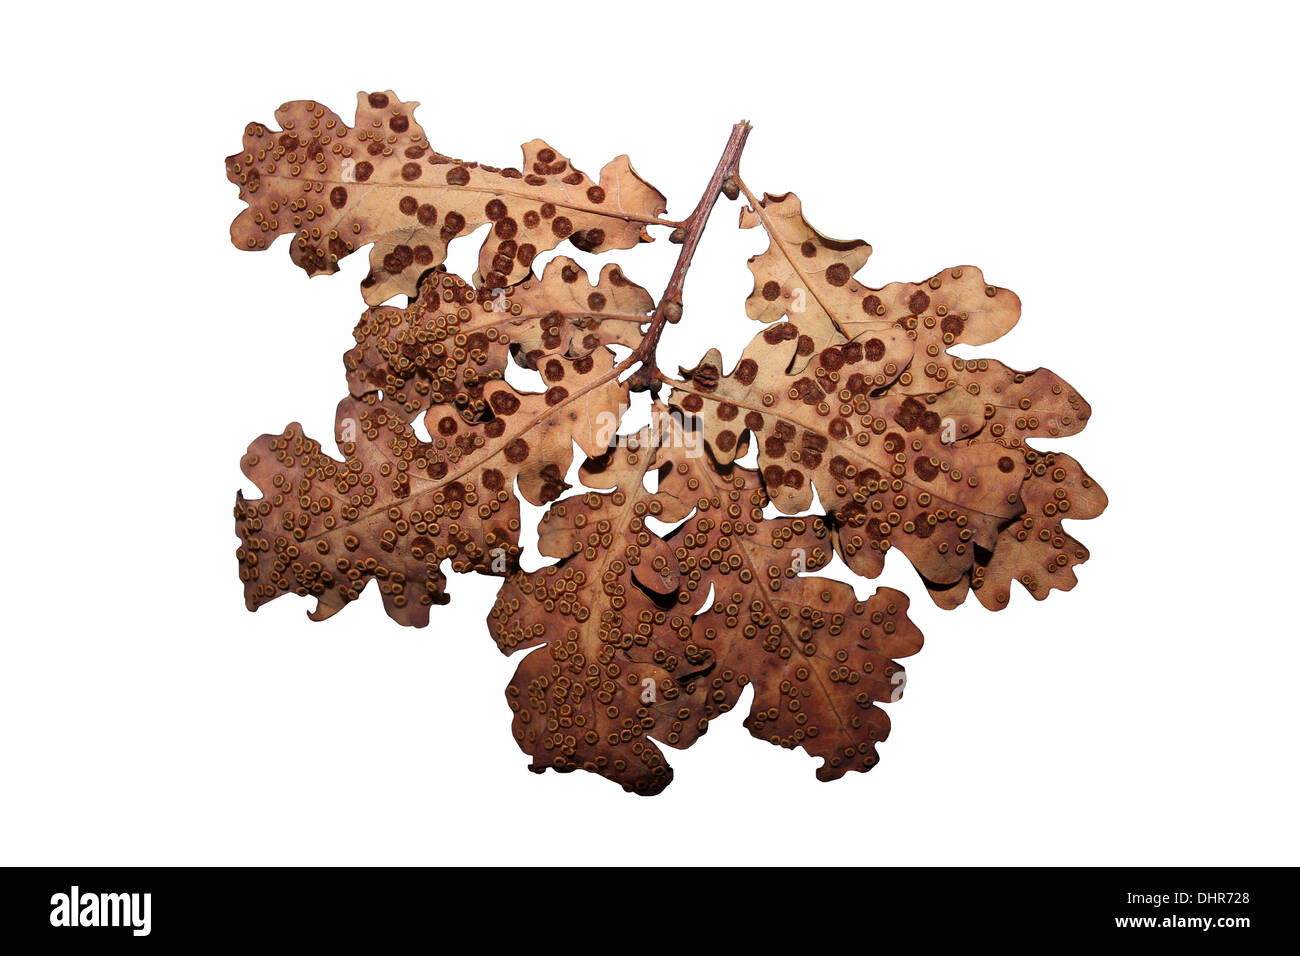 Underside Of Pedunculate Oak Leaves With Silk Button Galls And Common Spangle Galls Stock Photo